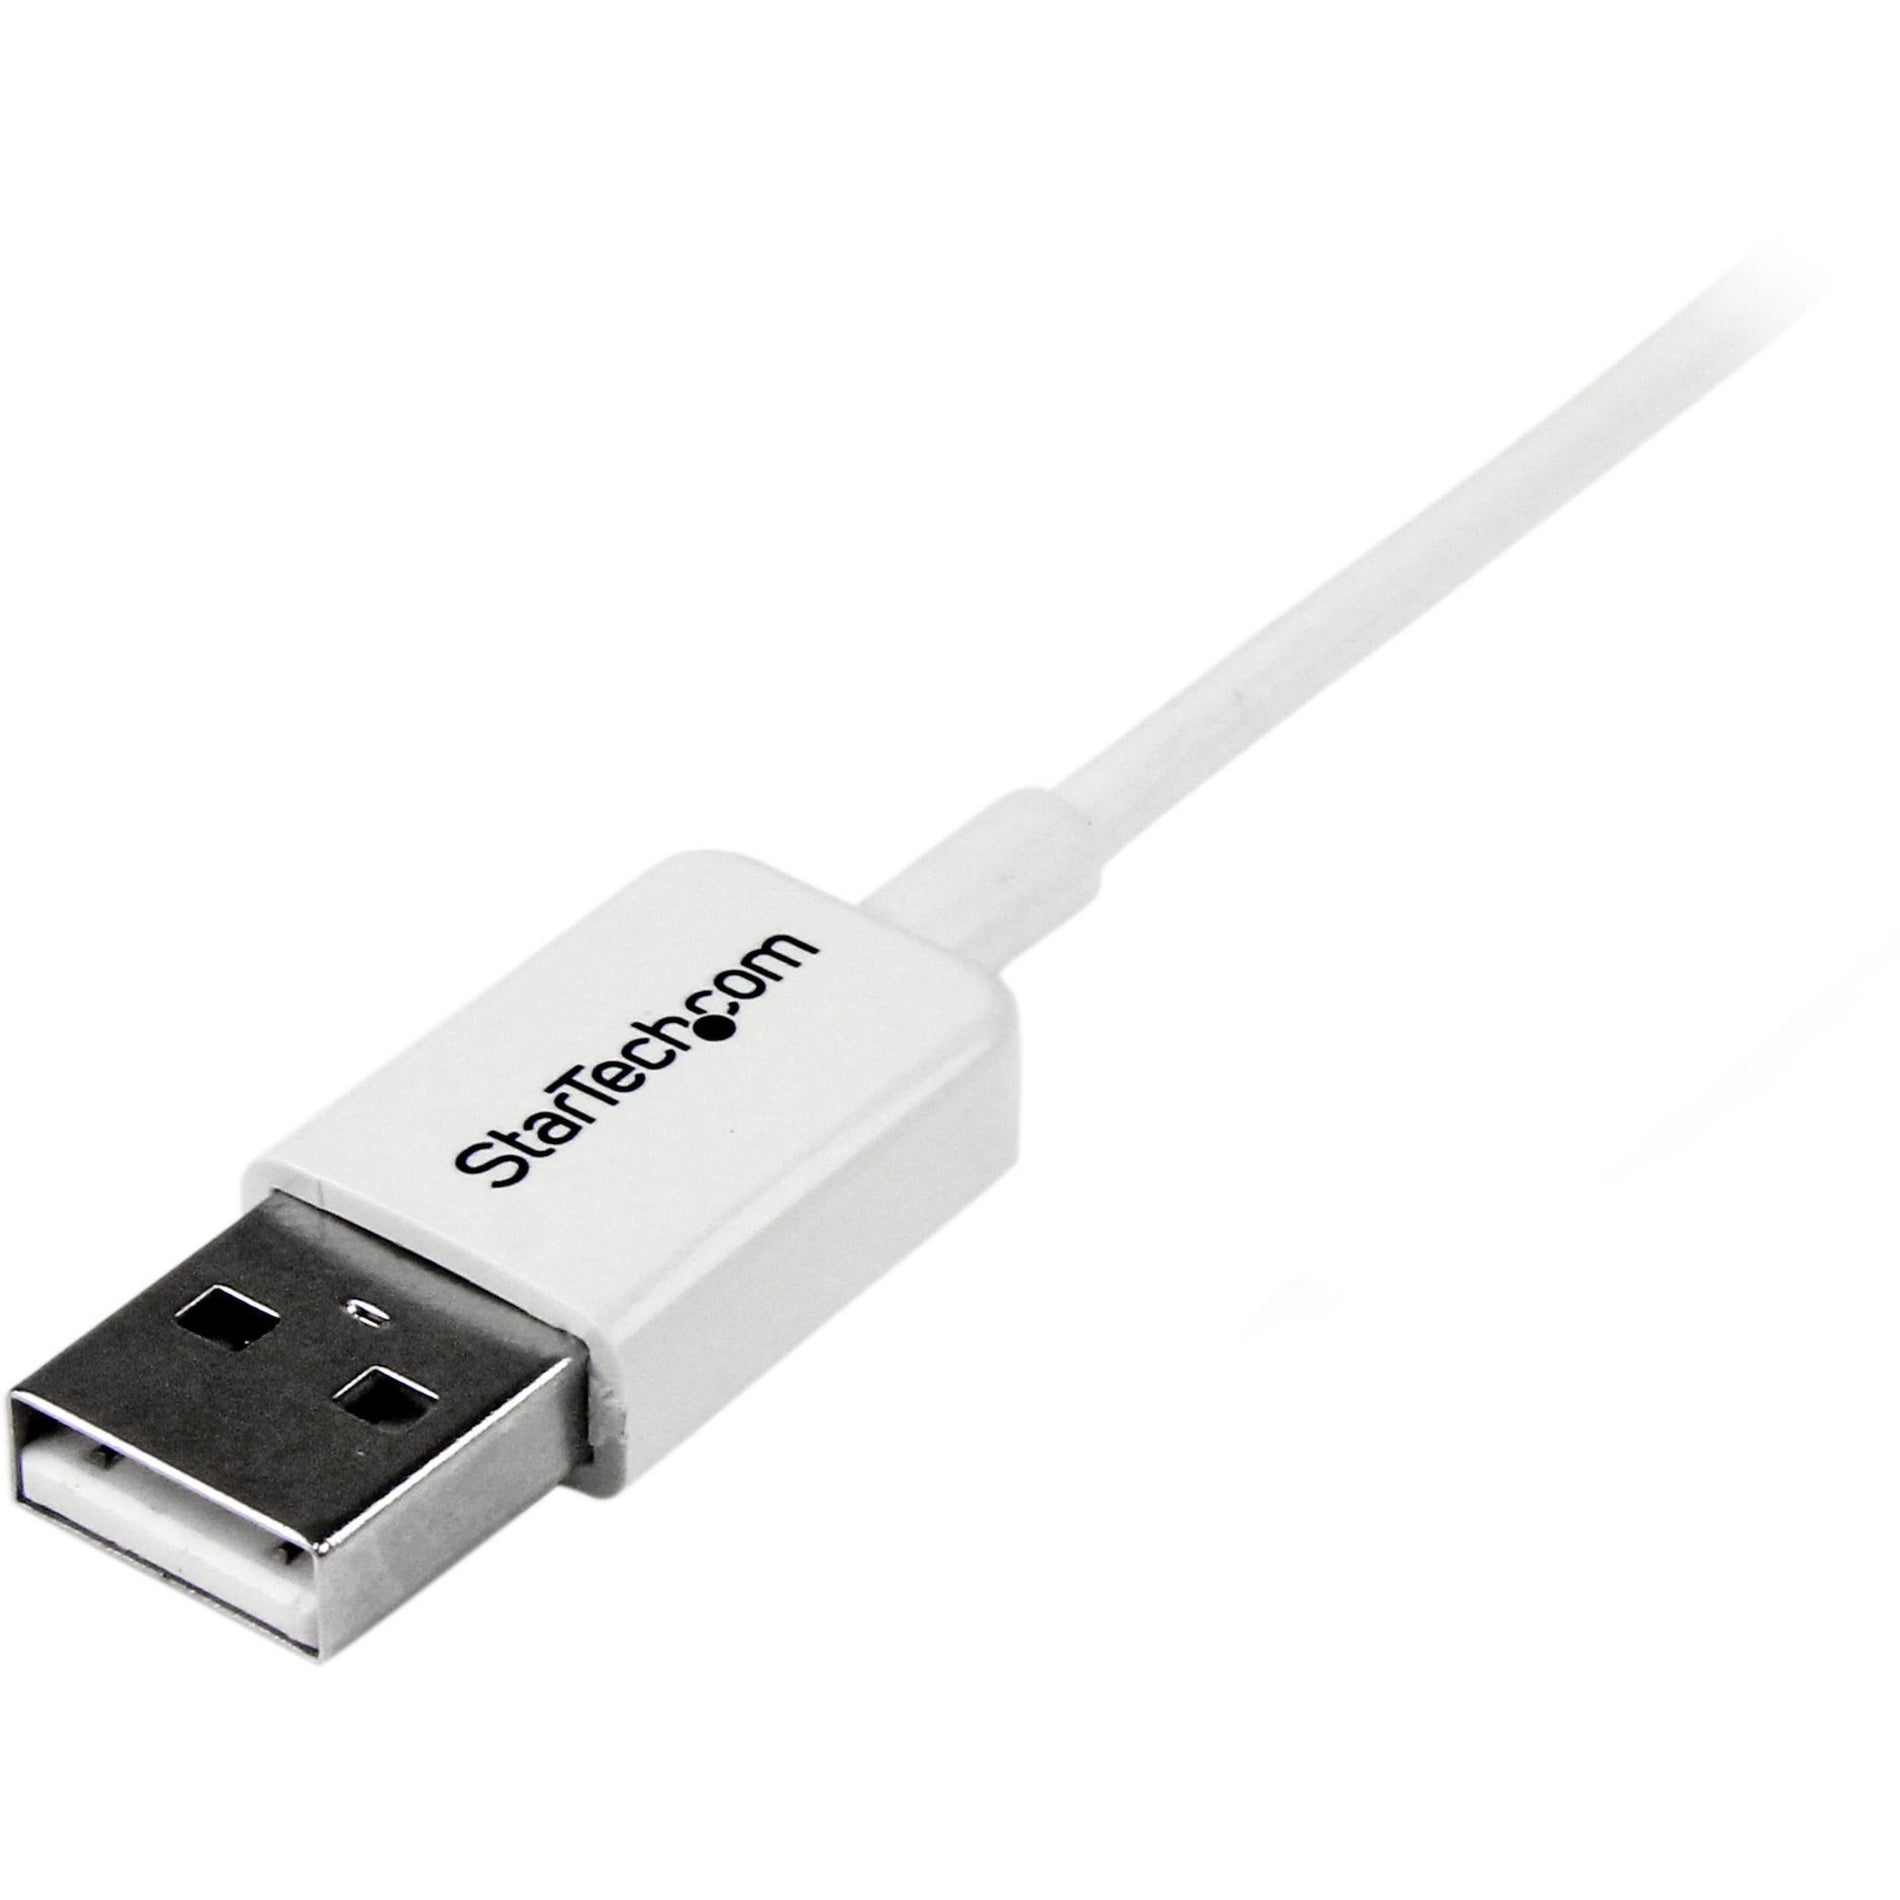 StarTech.com USBPAUB50CMW 0.5m White Micro USB Cable - A to Micro B, Molded, Strain Relief, 480 Mbit/s Data Transfer Rate